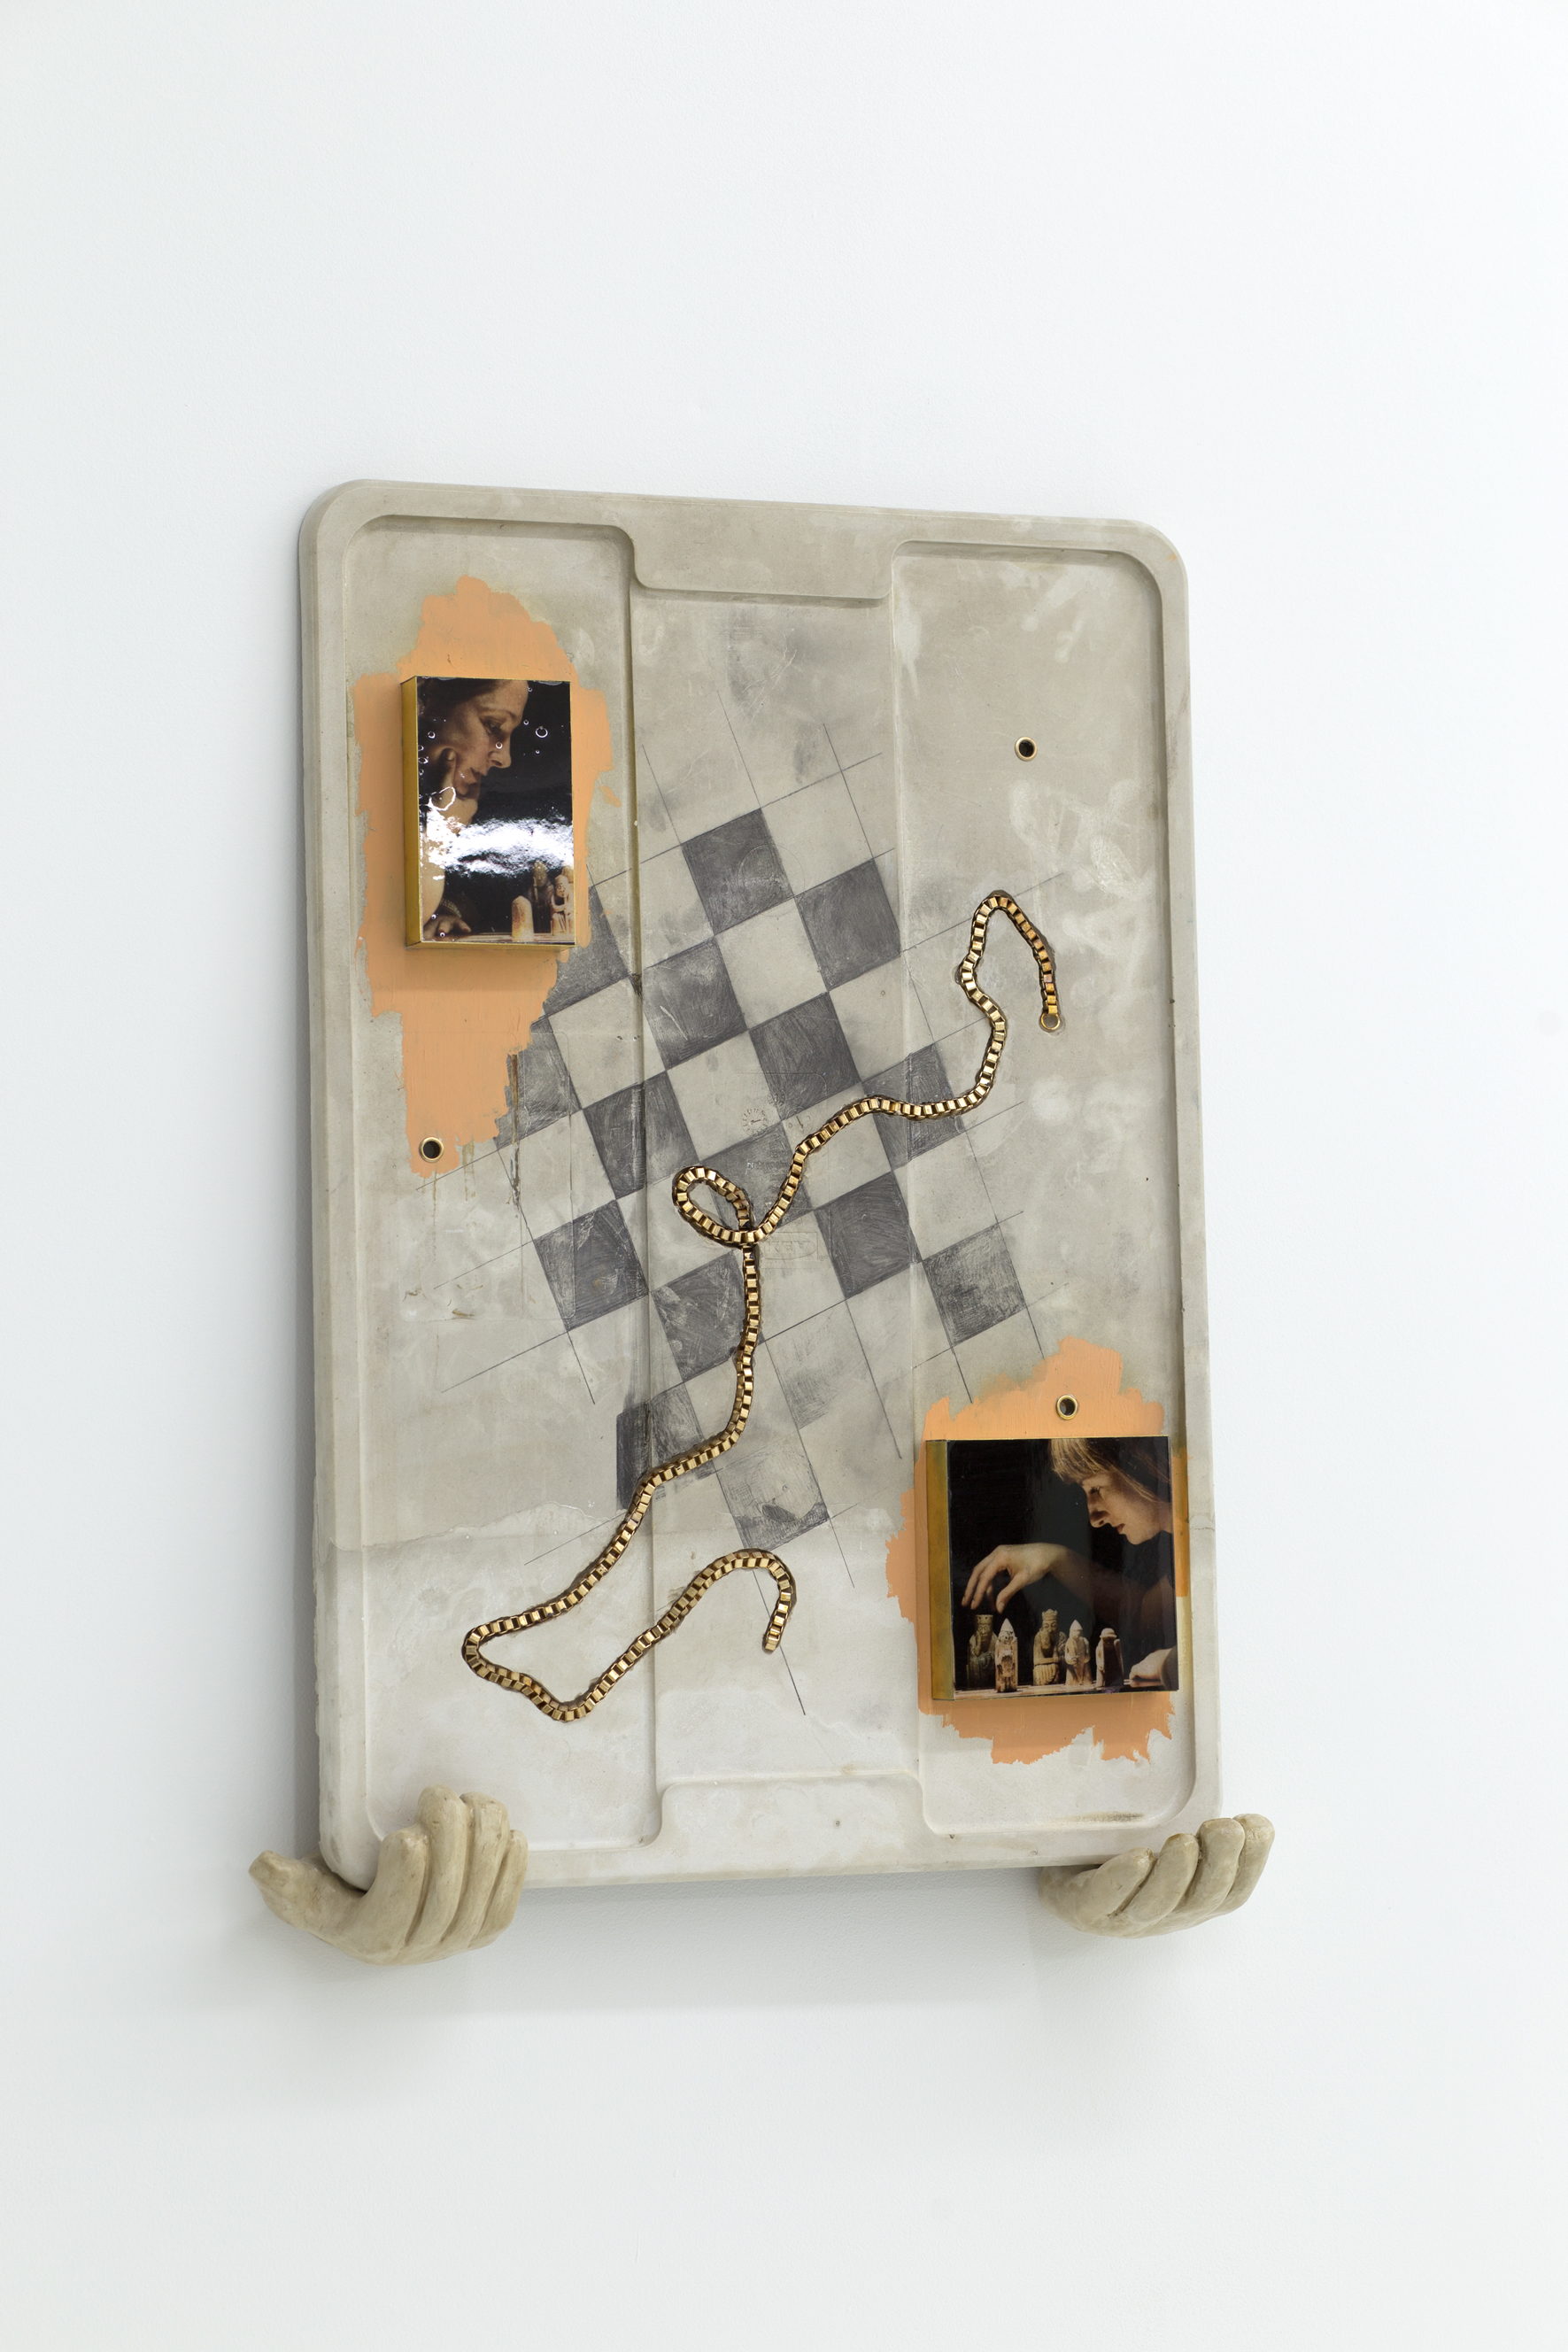 A concrete cast of a rubbermaid lid sits on two ceramic hands. It has a chess board sketched on its surface, and a necklace inset